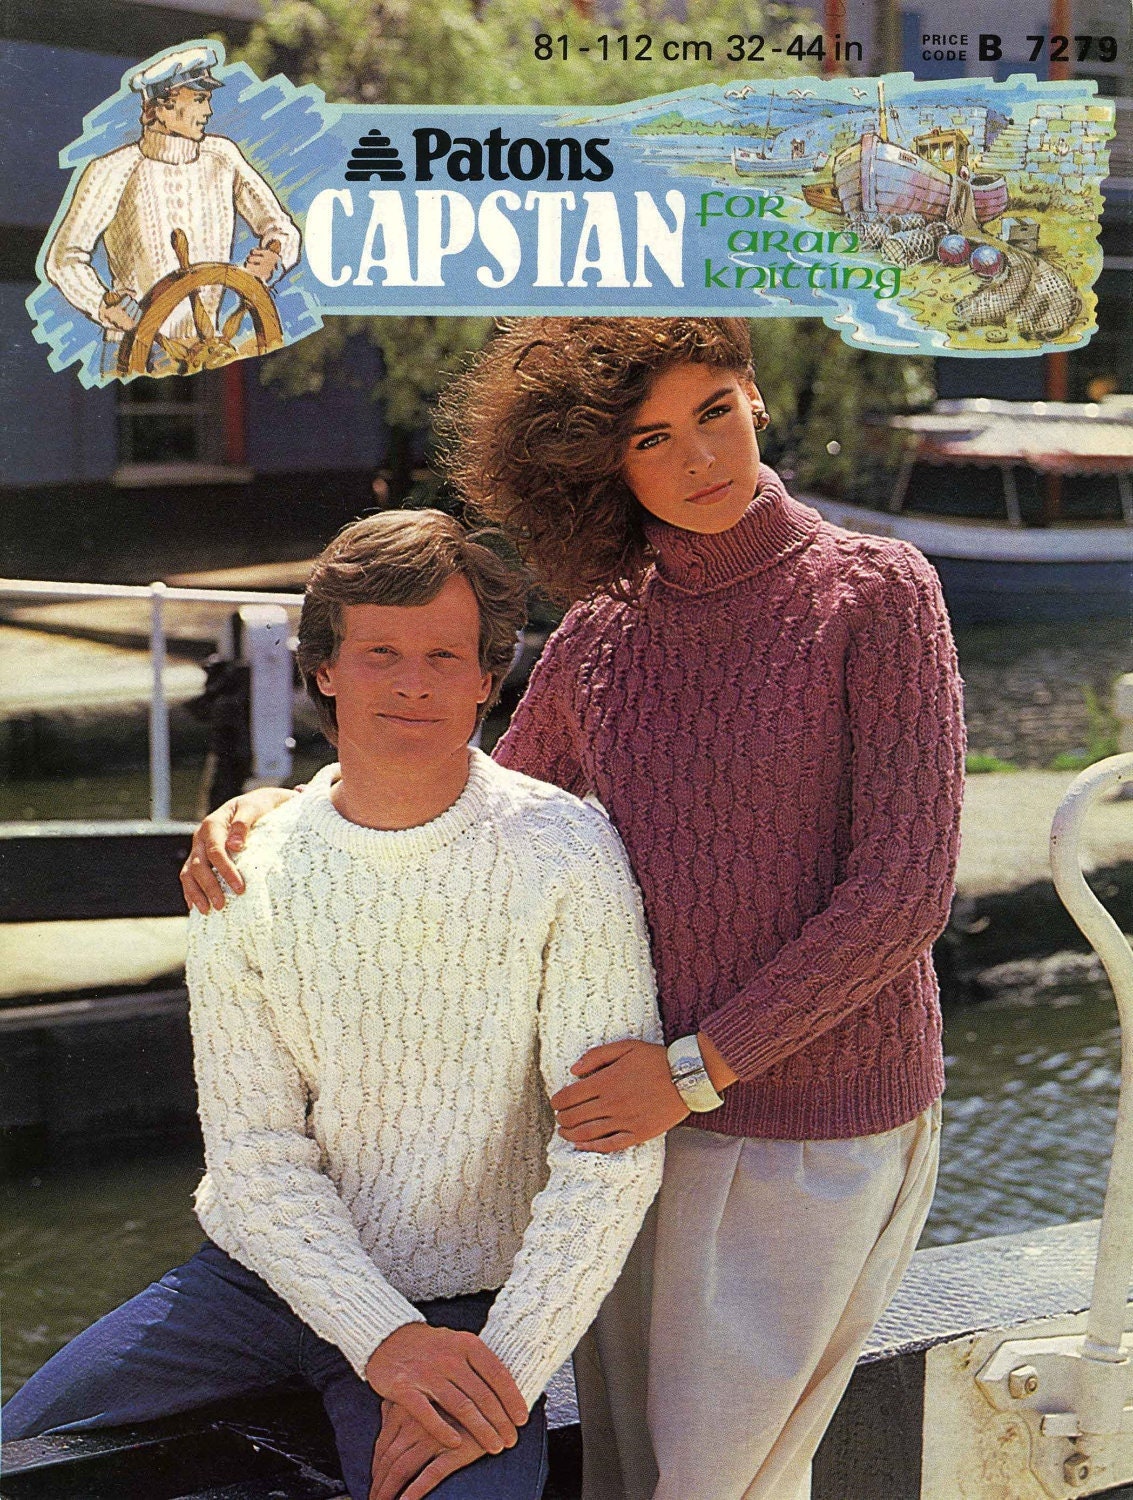 His & Hers Jumper / Sweater, 32"-44" Chest, Aran, 80s Knitting Pattern, Patons 7279